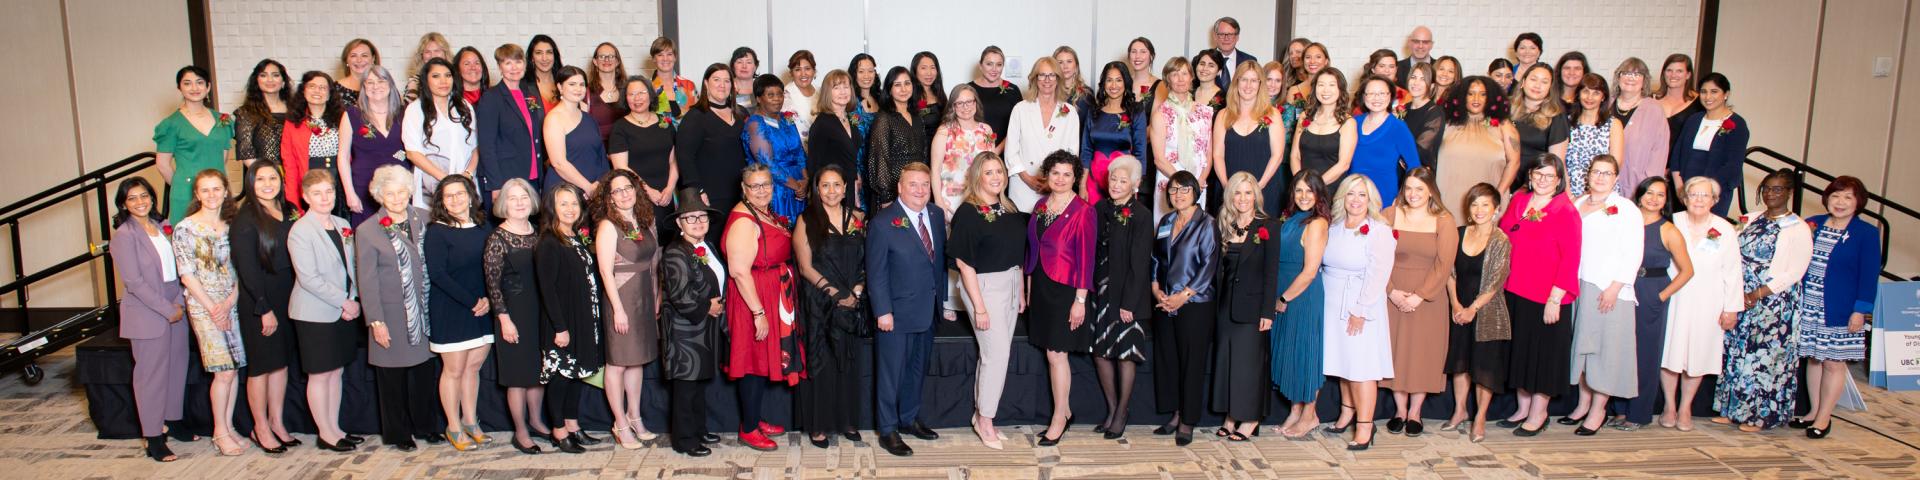 Women of Distinction Award group picture